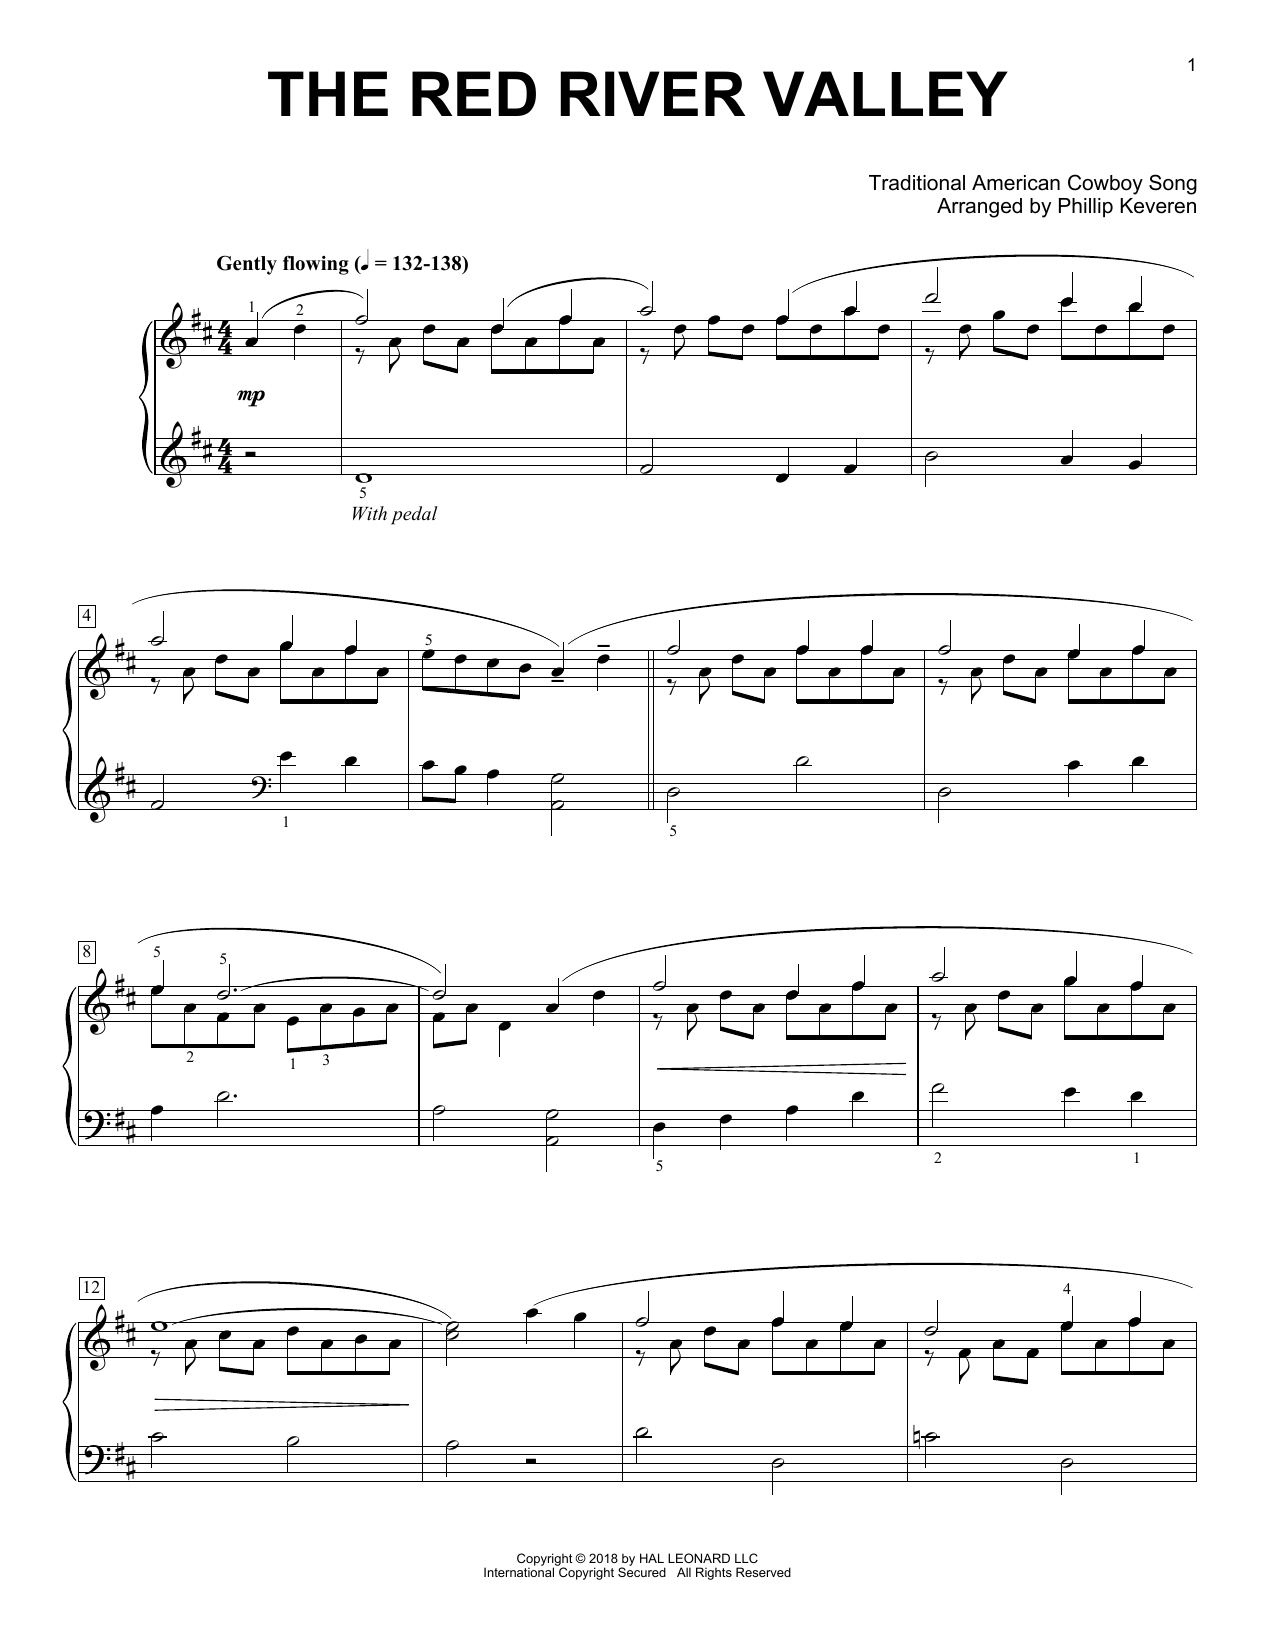 Download Traditional American Cowboy Song The Red River Valley [Classical version Sheet Music